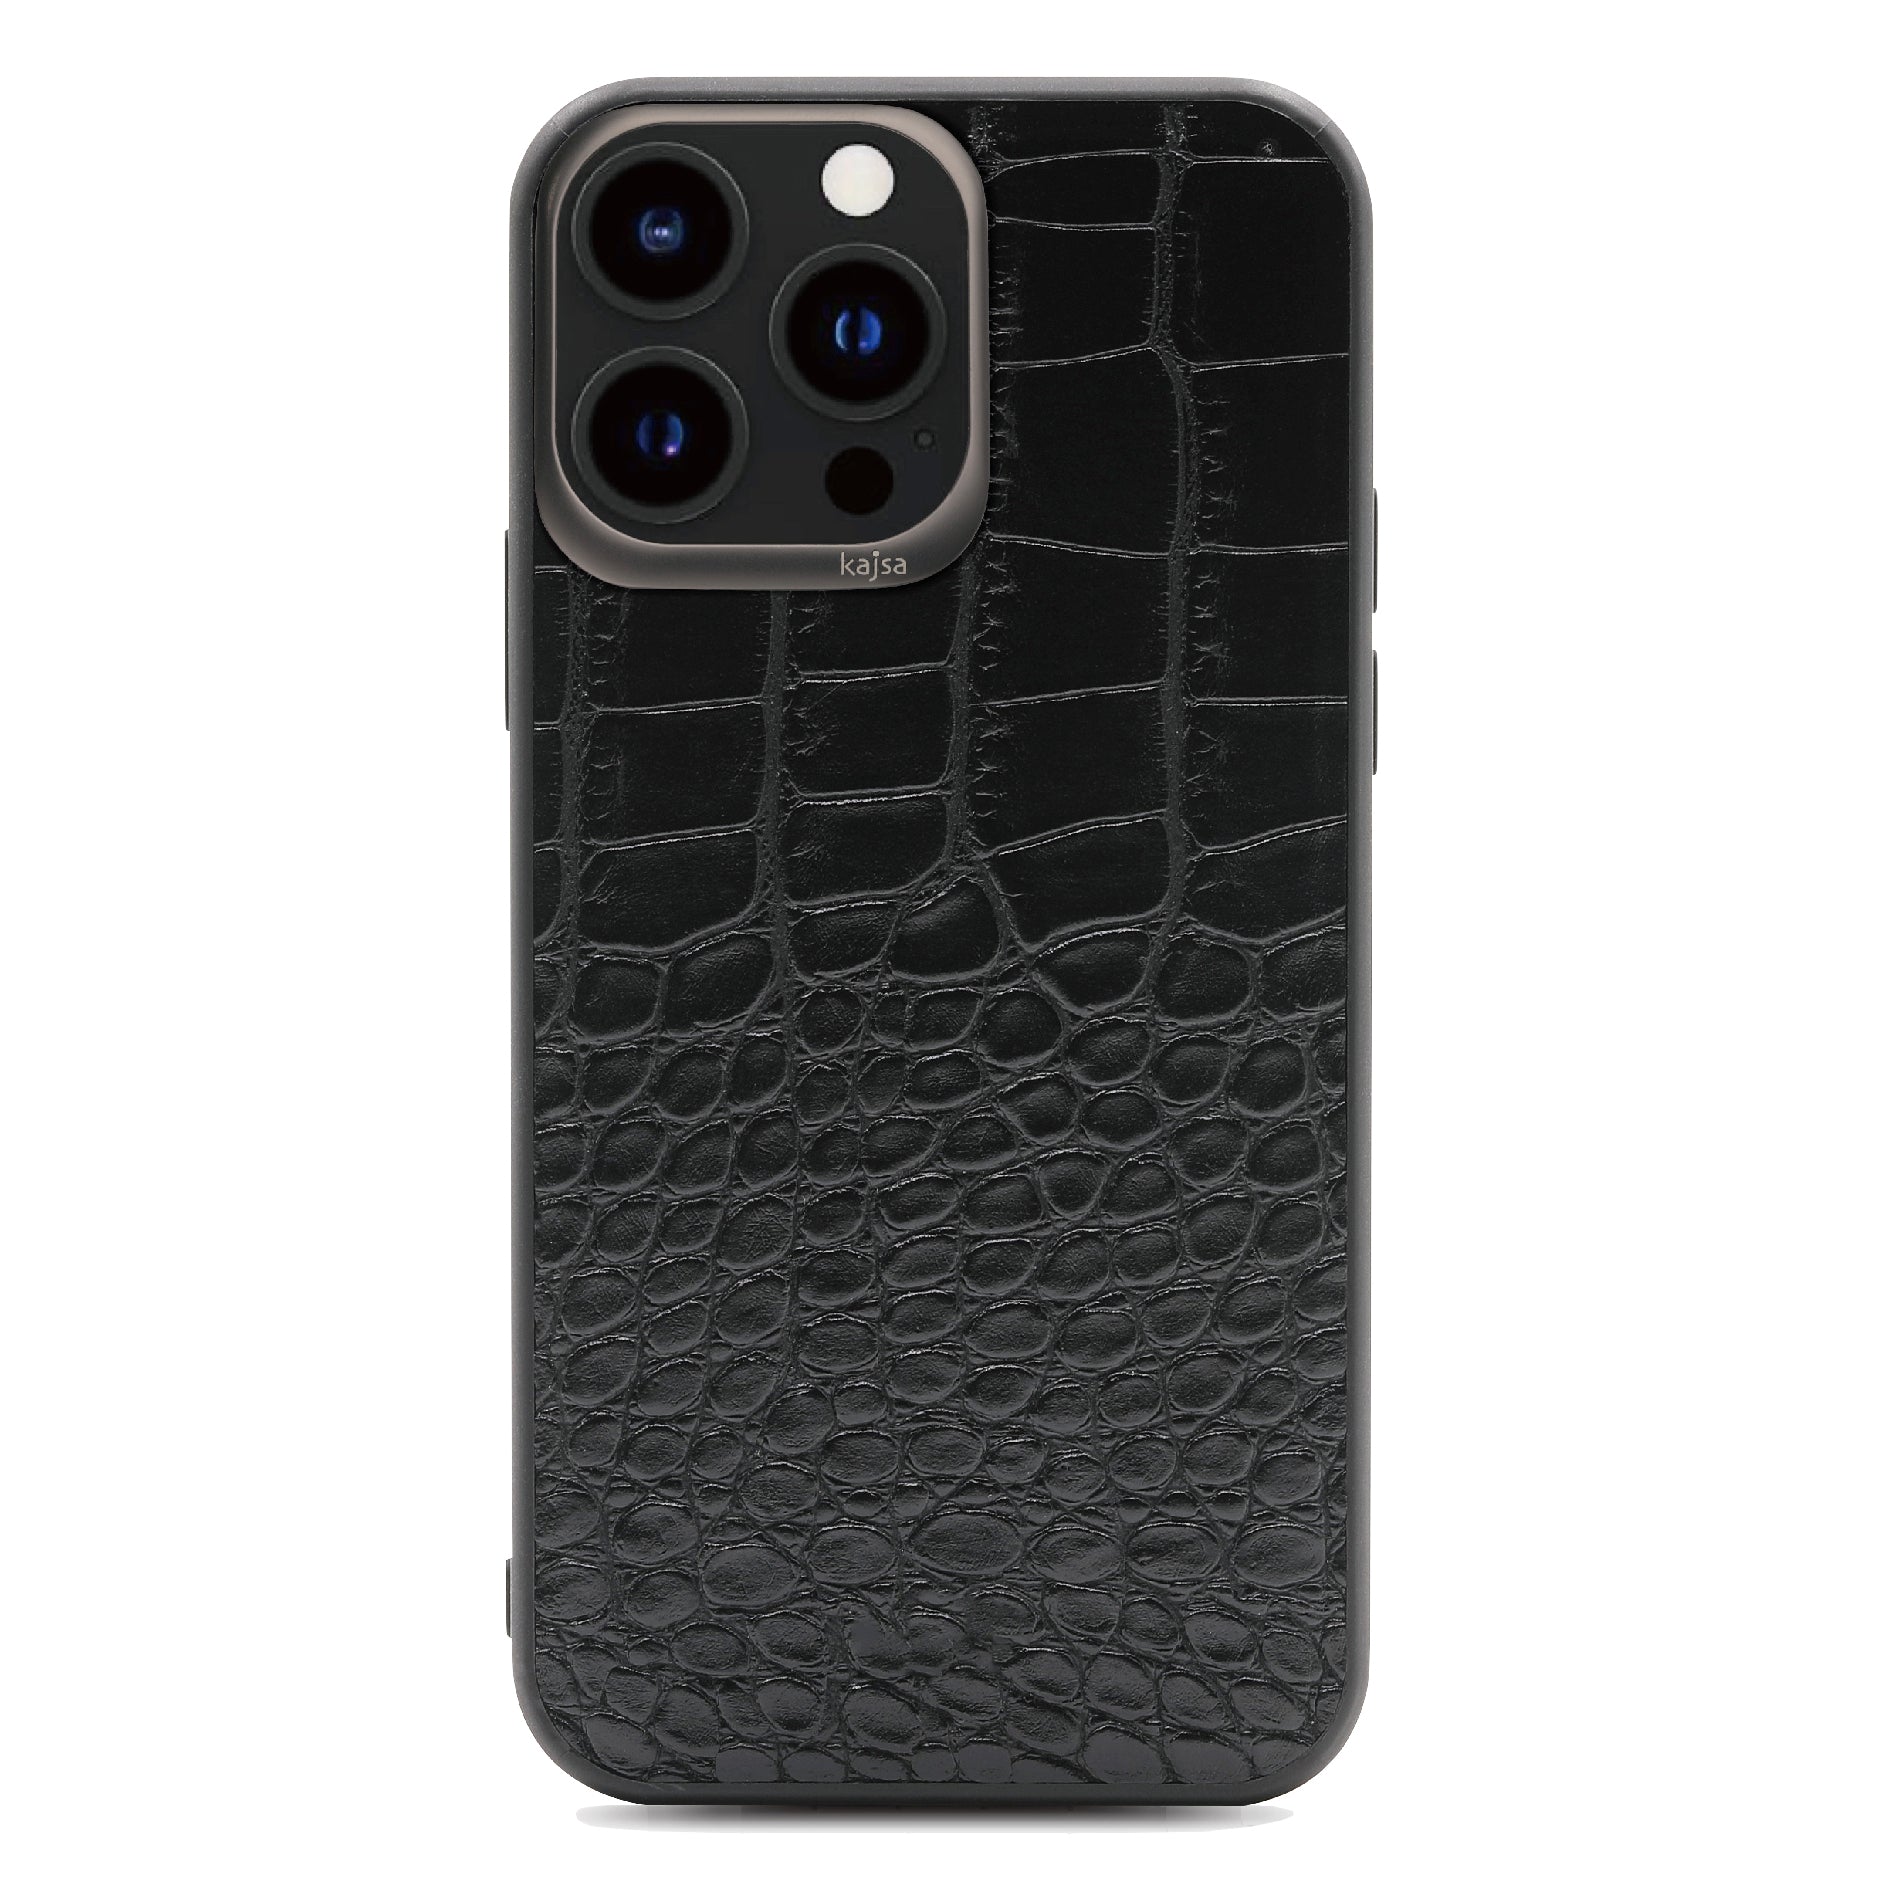 Glamorous Collection - Croco II Back Case for iPhone 13-Phone Case- phone case - phone cases- phone cover- iphone cover- iphone case- iphone cases- leather case- leather cases- DIYCASE - custom case - leather cover - hand strap case - croco pattern case - snake pattern case - carbon fiber phone case - phone case brand - unique phone case - high quality - phone case brand - protective case - buy phone case hong kong - online buy phone case - iphone‎手機殼 - 客製化手機殼 - samsung ‎手機殼 - 香港手機殼 - 買電話殼